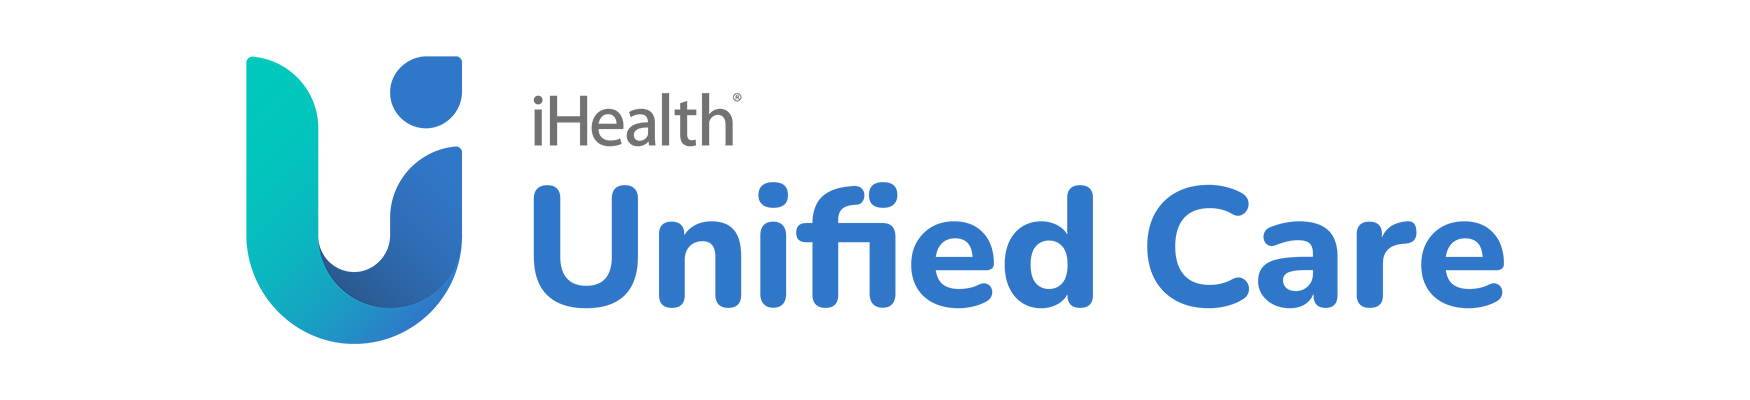 https://www.chcanys.org/sites/default/files/2021-11/iHealth%20Logo.png